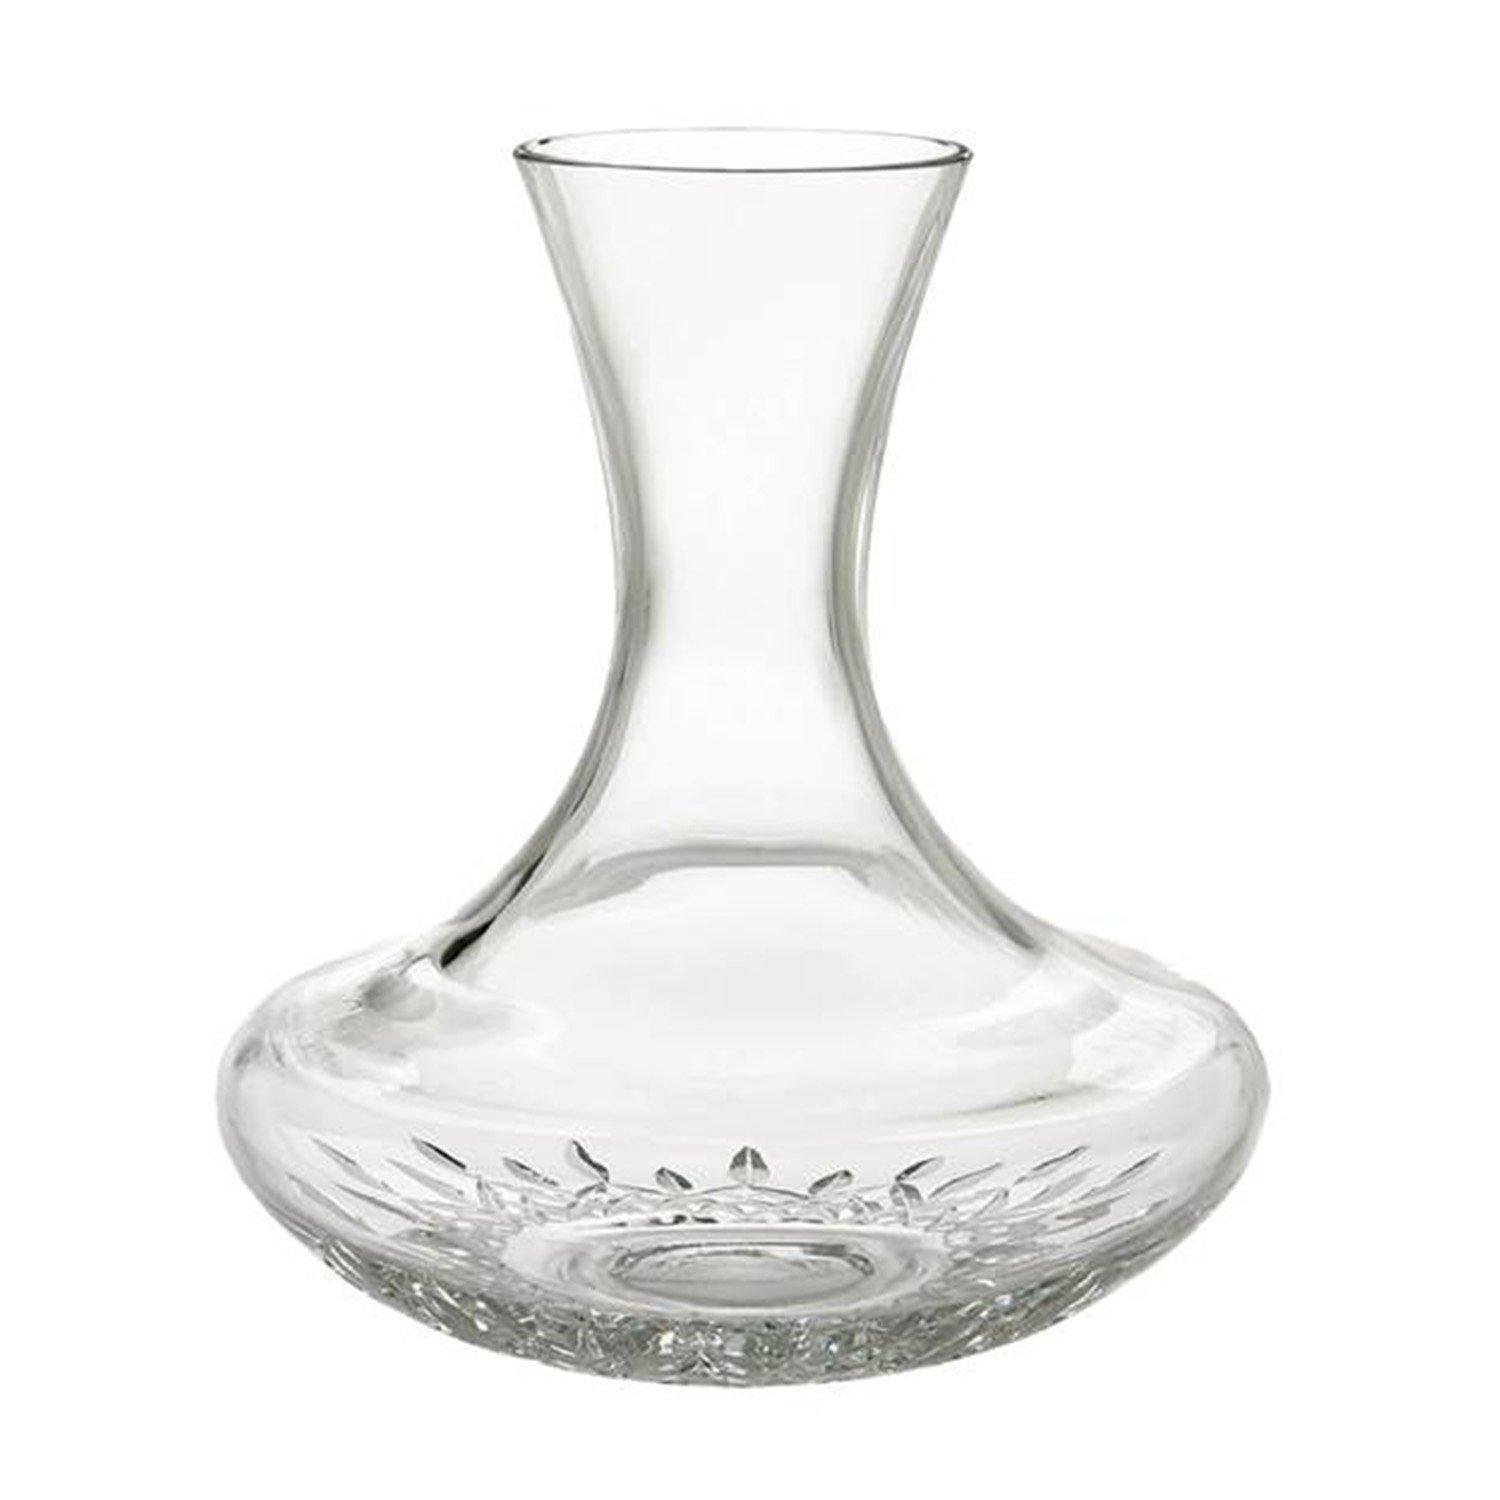 Waterford Lismore Nouveau Decanting Carafe